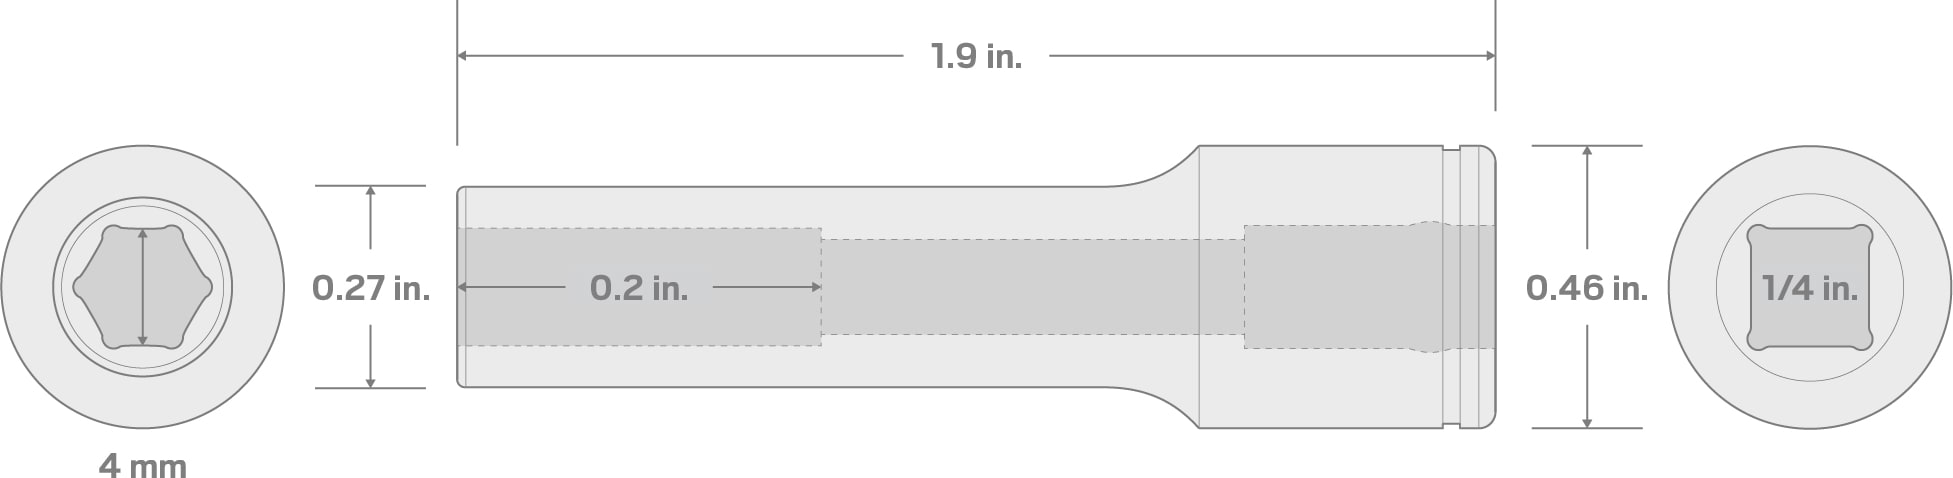 Specs for 1/4 Inch Drive x 4 mm Deep 6-Point Socket